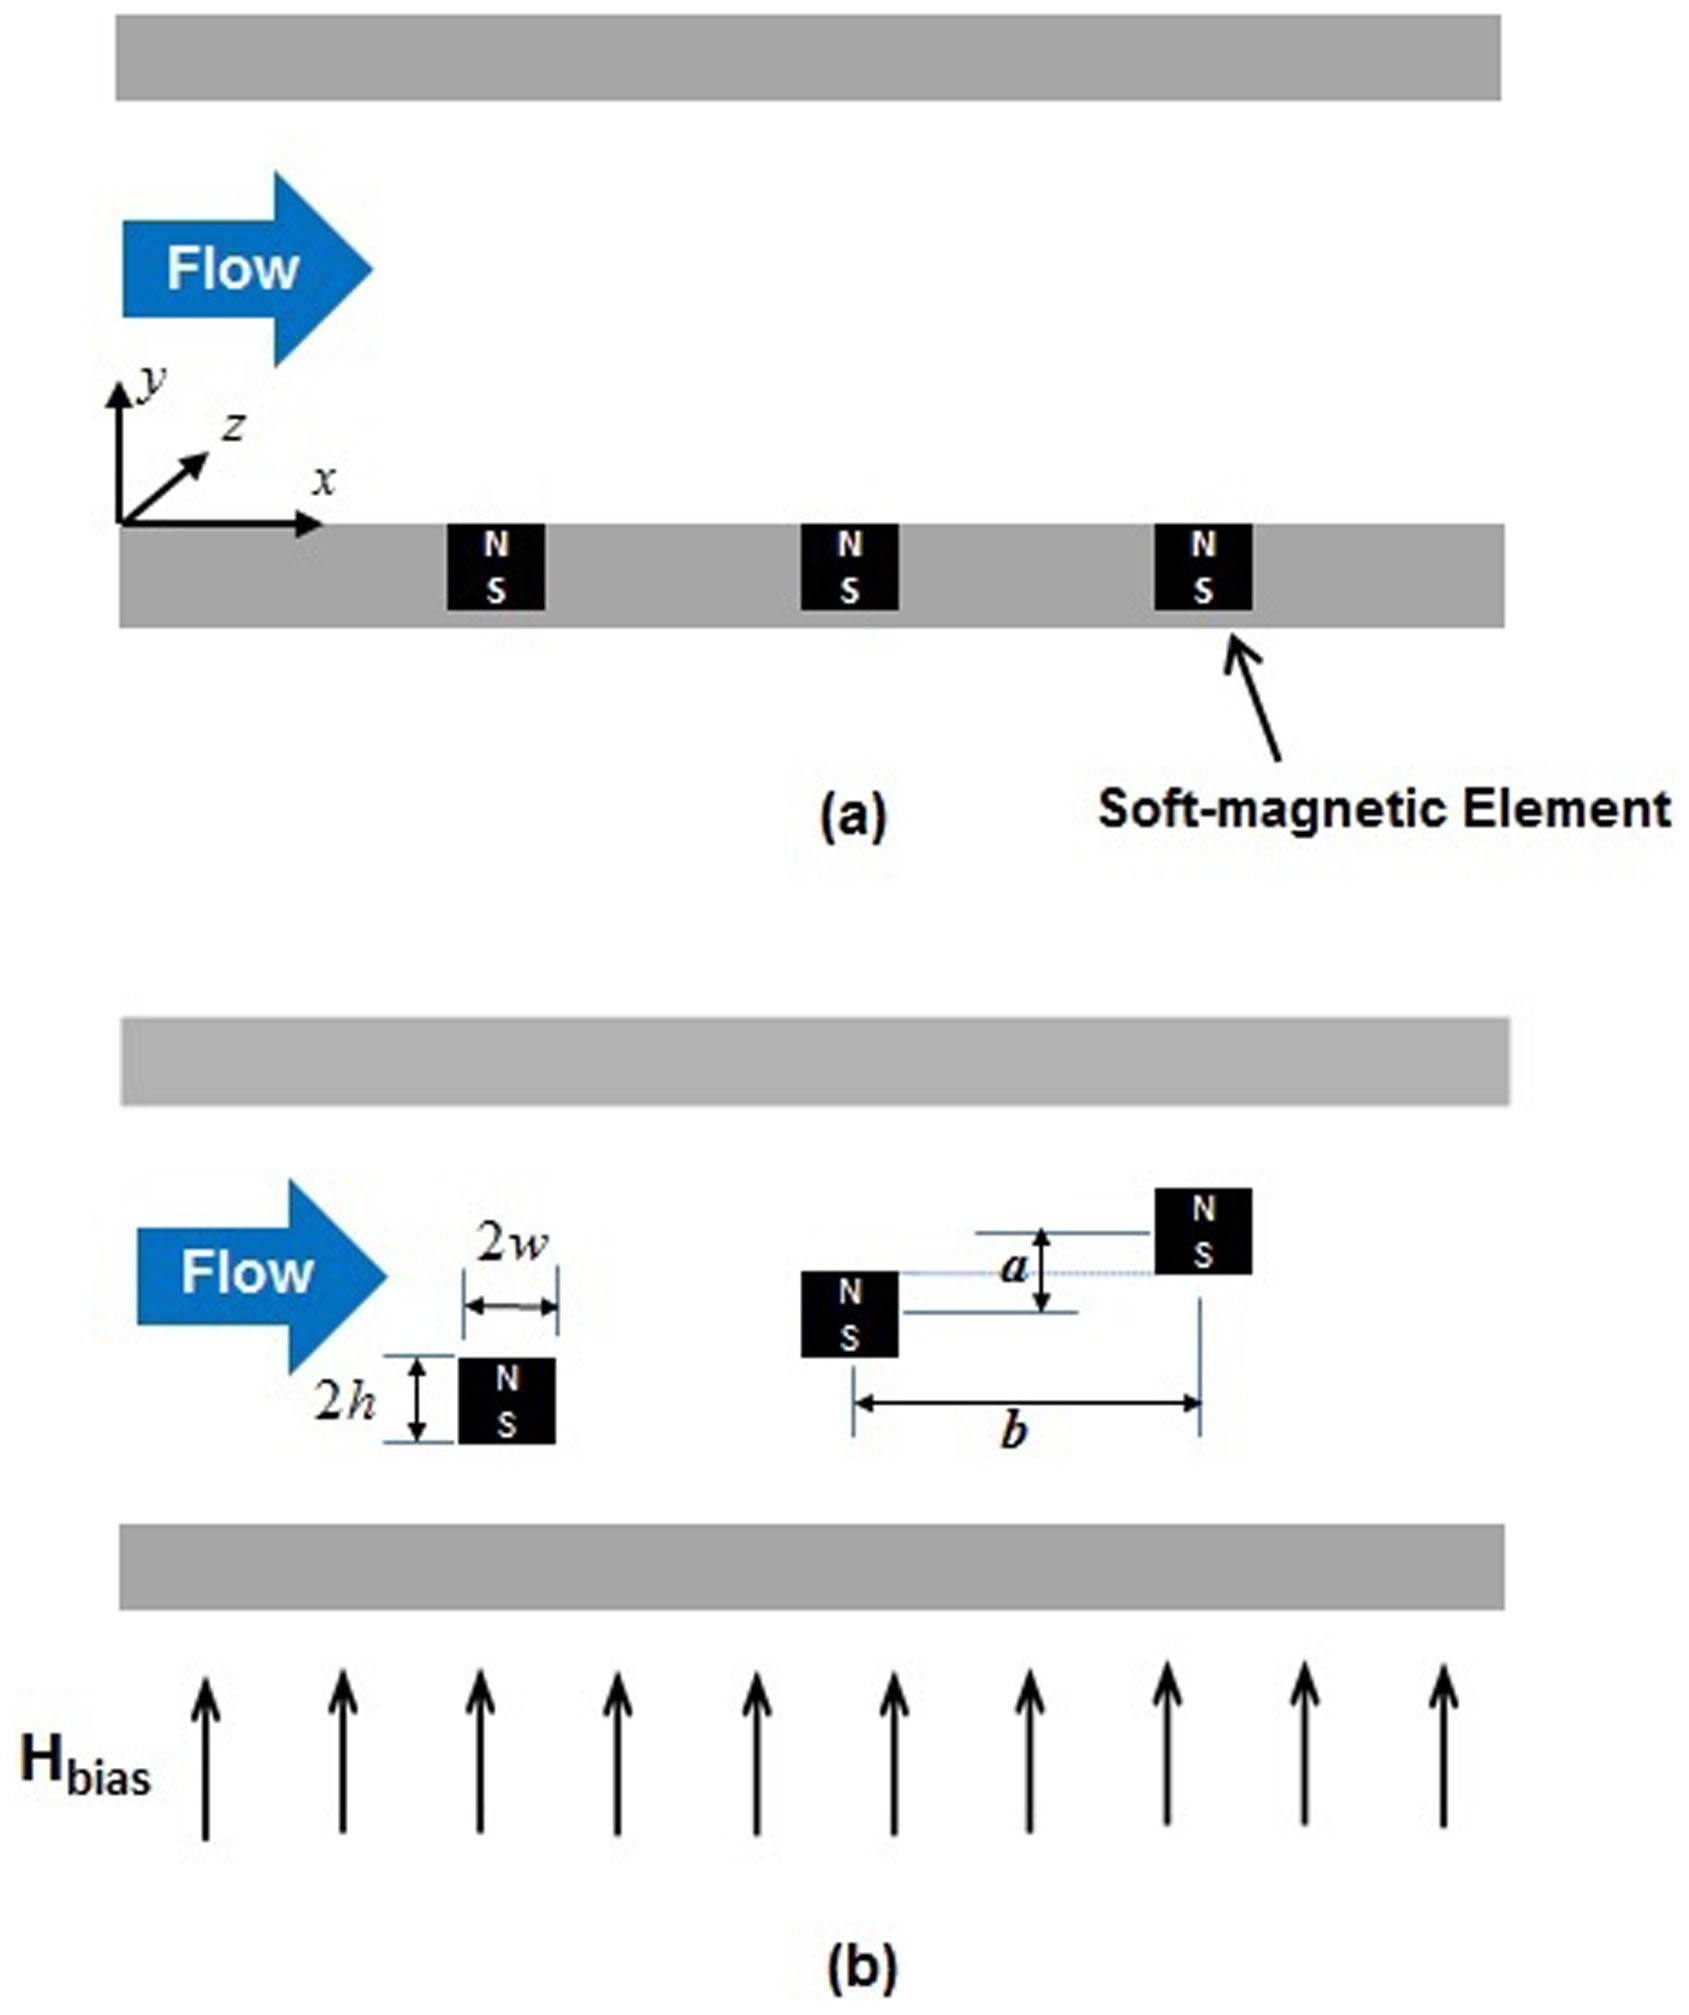 Analysis of Magnetic Bioseparation in Microfluidic Systems with Flow-Invasive Magnetic Elements | Reports